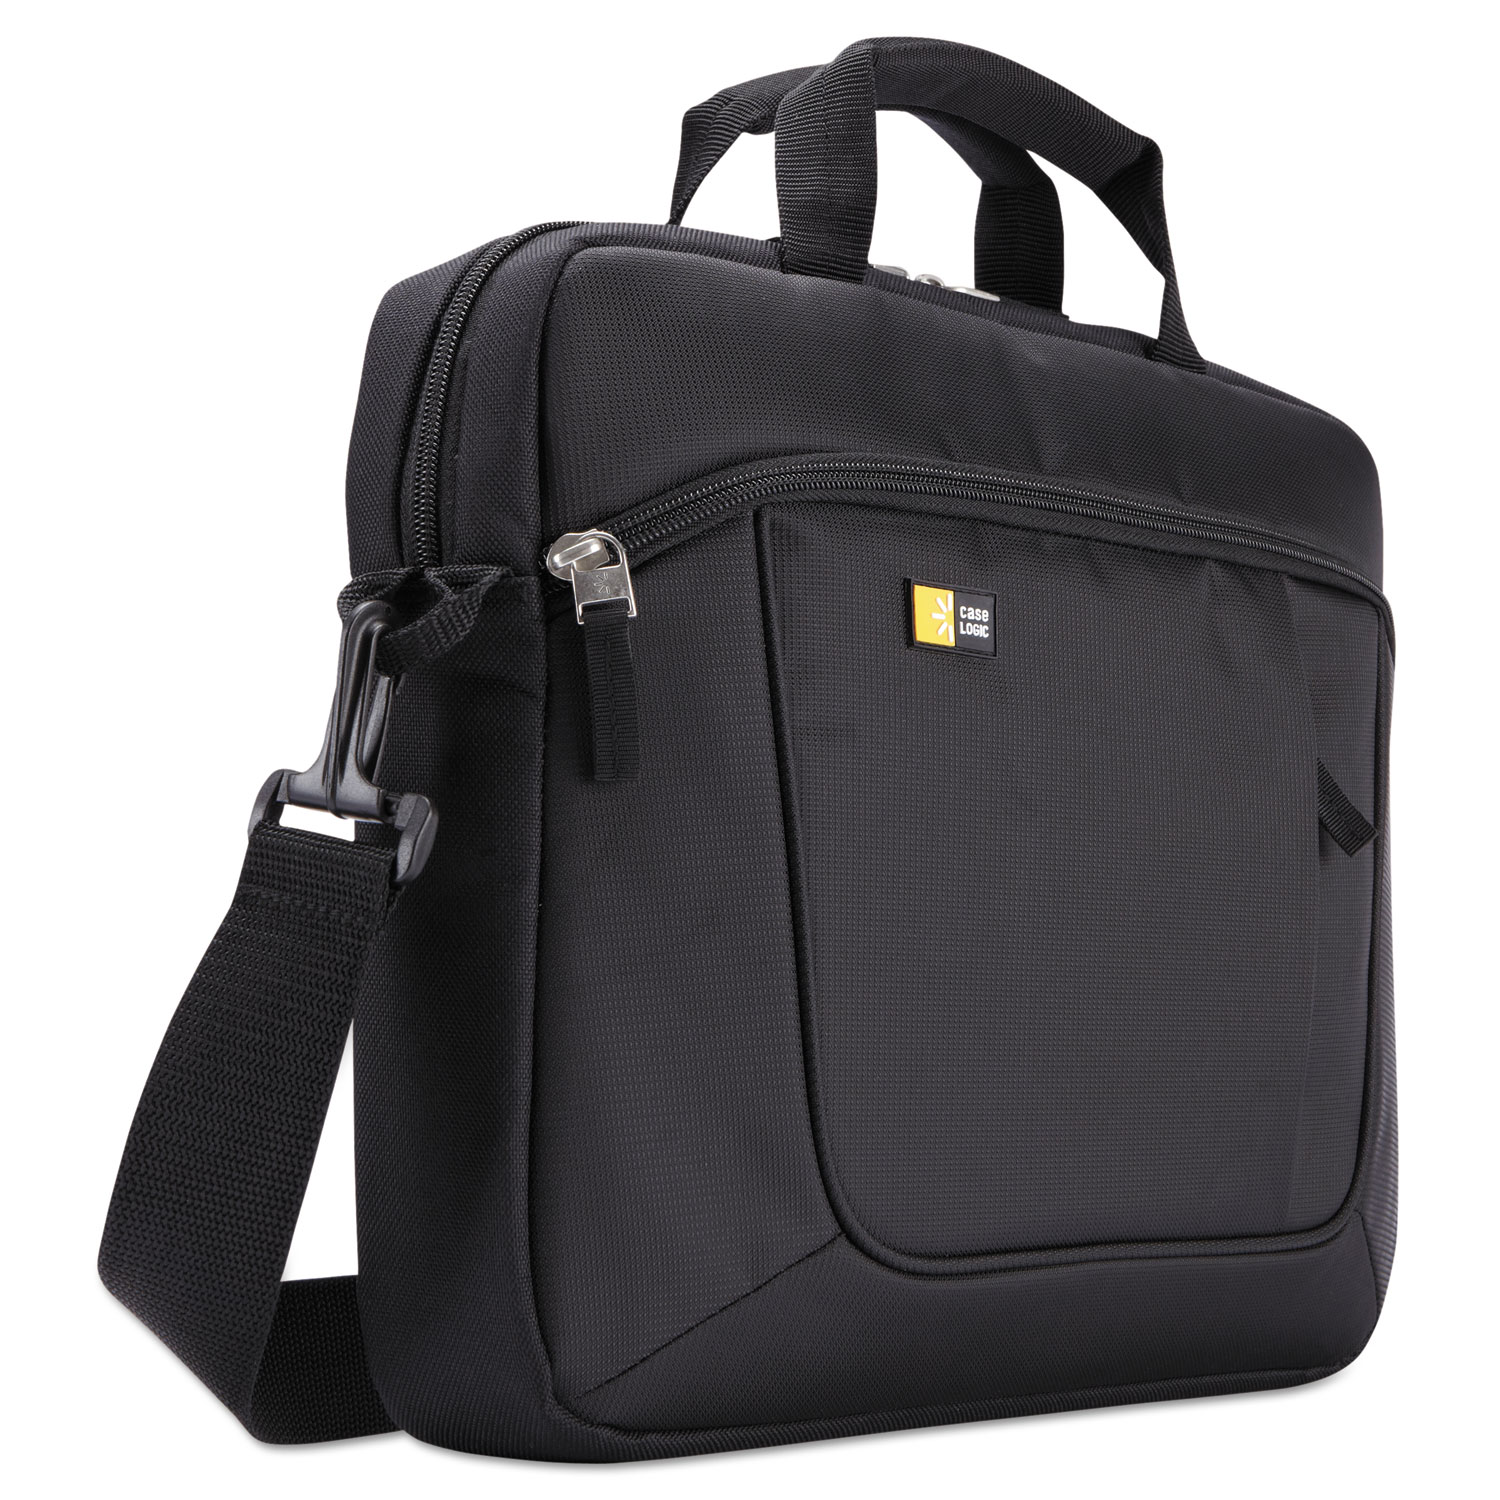  Case Logic 3201576 Laptop and Tablet Case for 14.1 Laptop and iPad Slim, Polyester, Black (CLG3201576) 